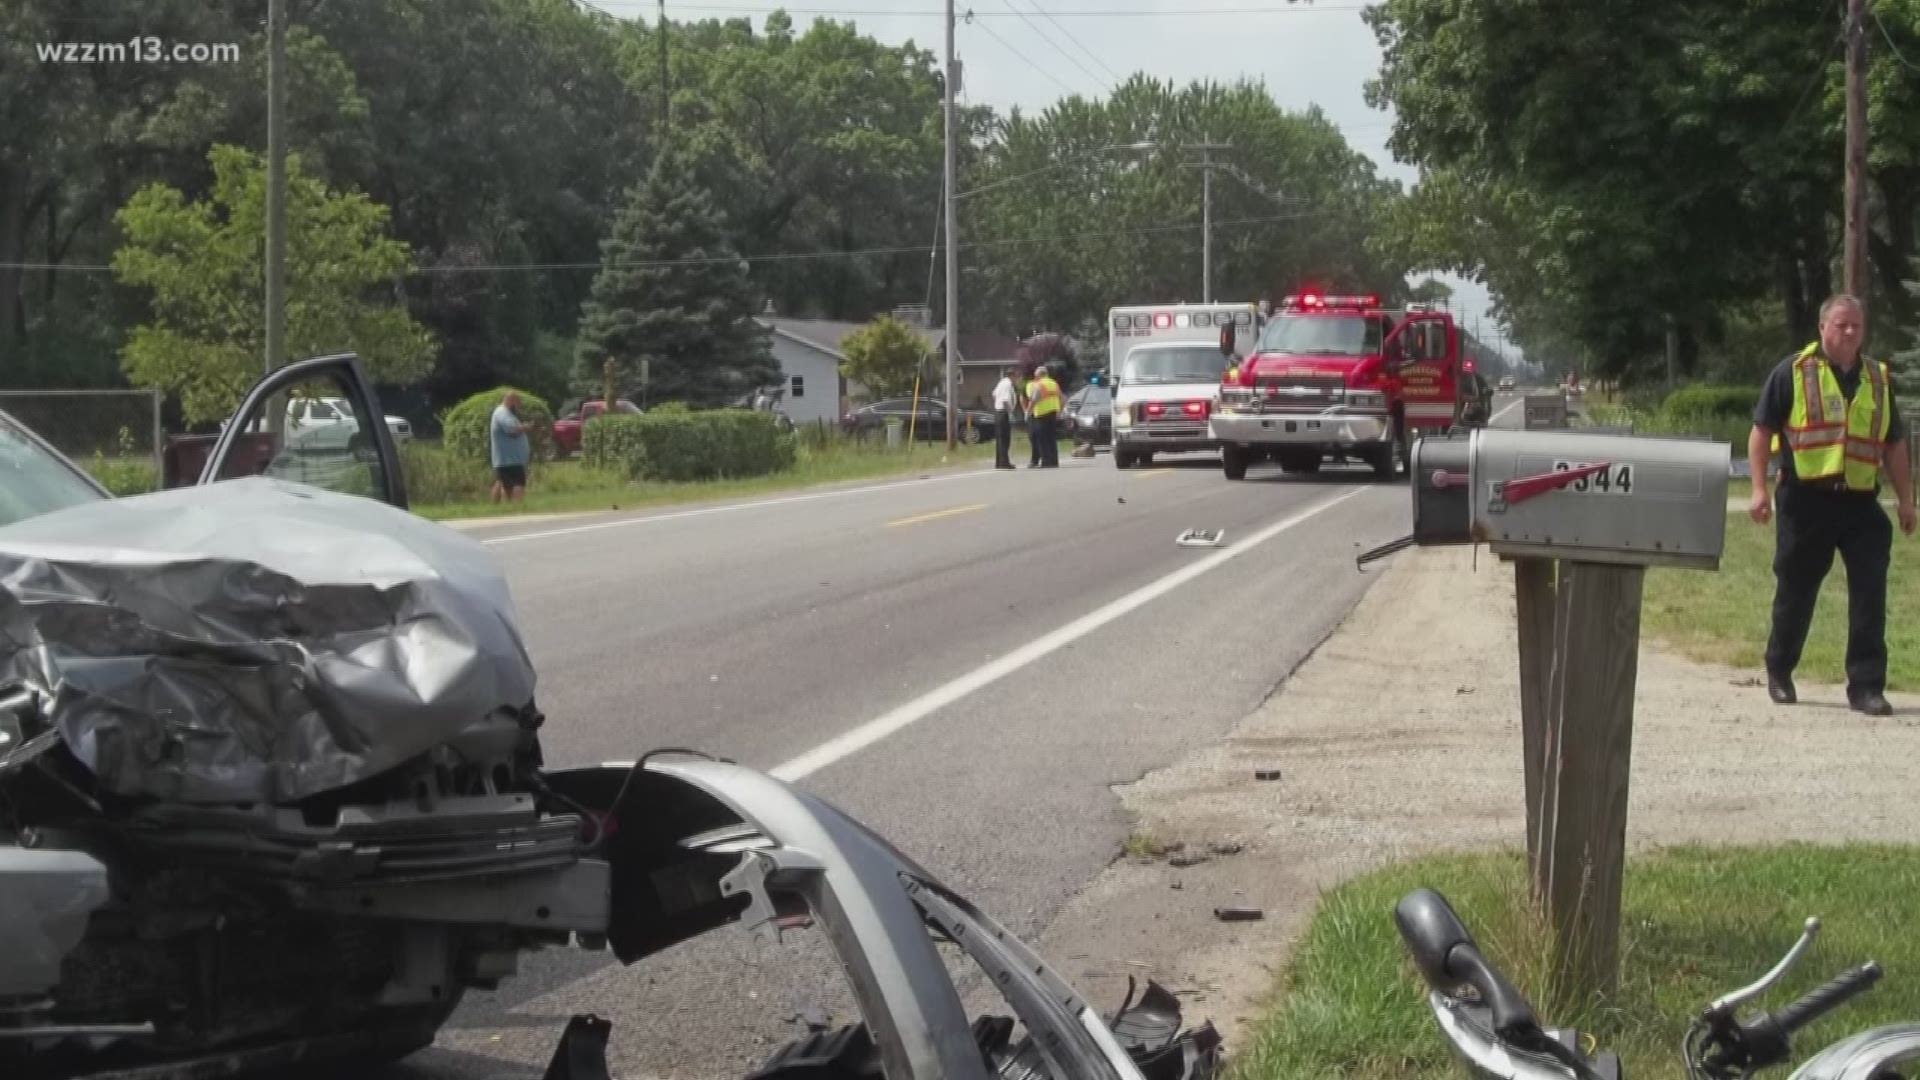 Motorcyclist killed in Muskegon County crash